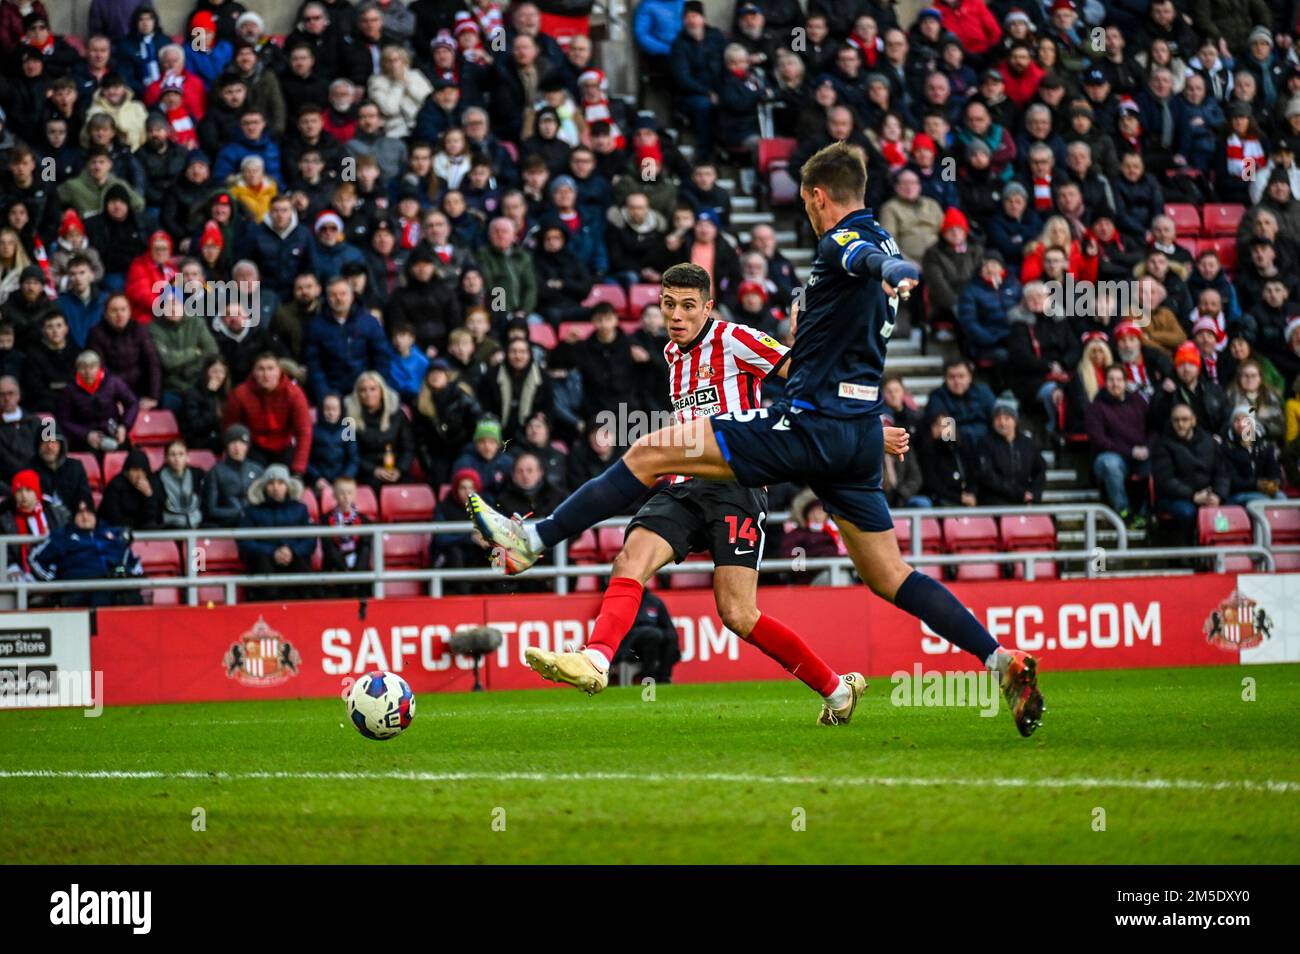 Sunderland AFC forward Ross Stewart takes a shot at goal against Blackburn Rovers in the EFL Championship. Stock Photo